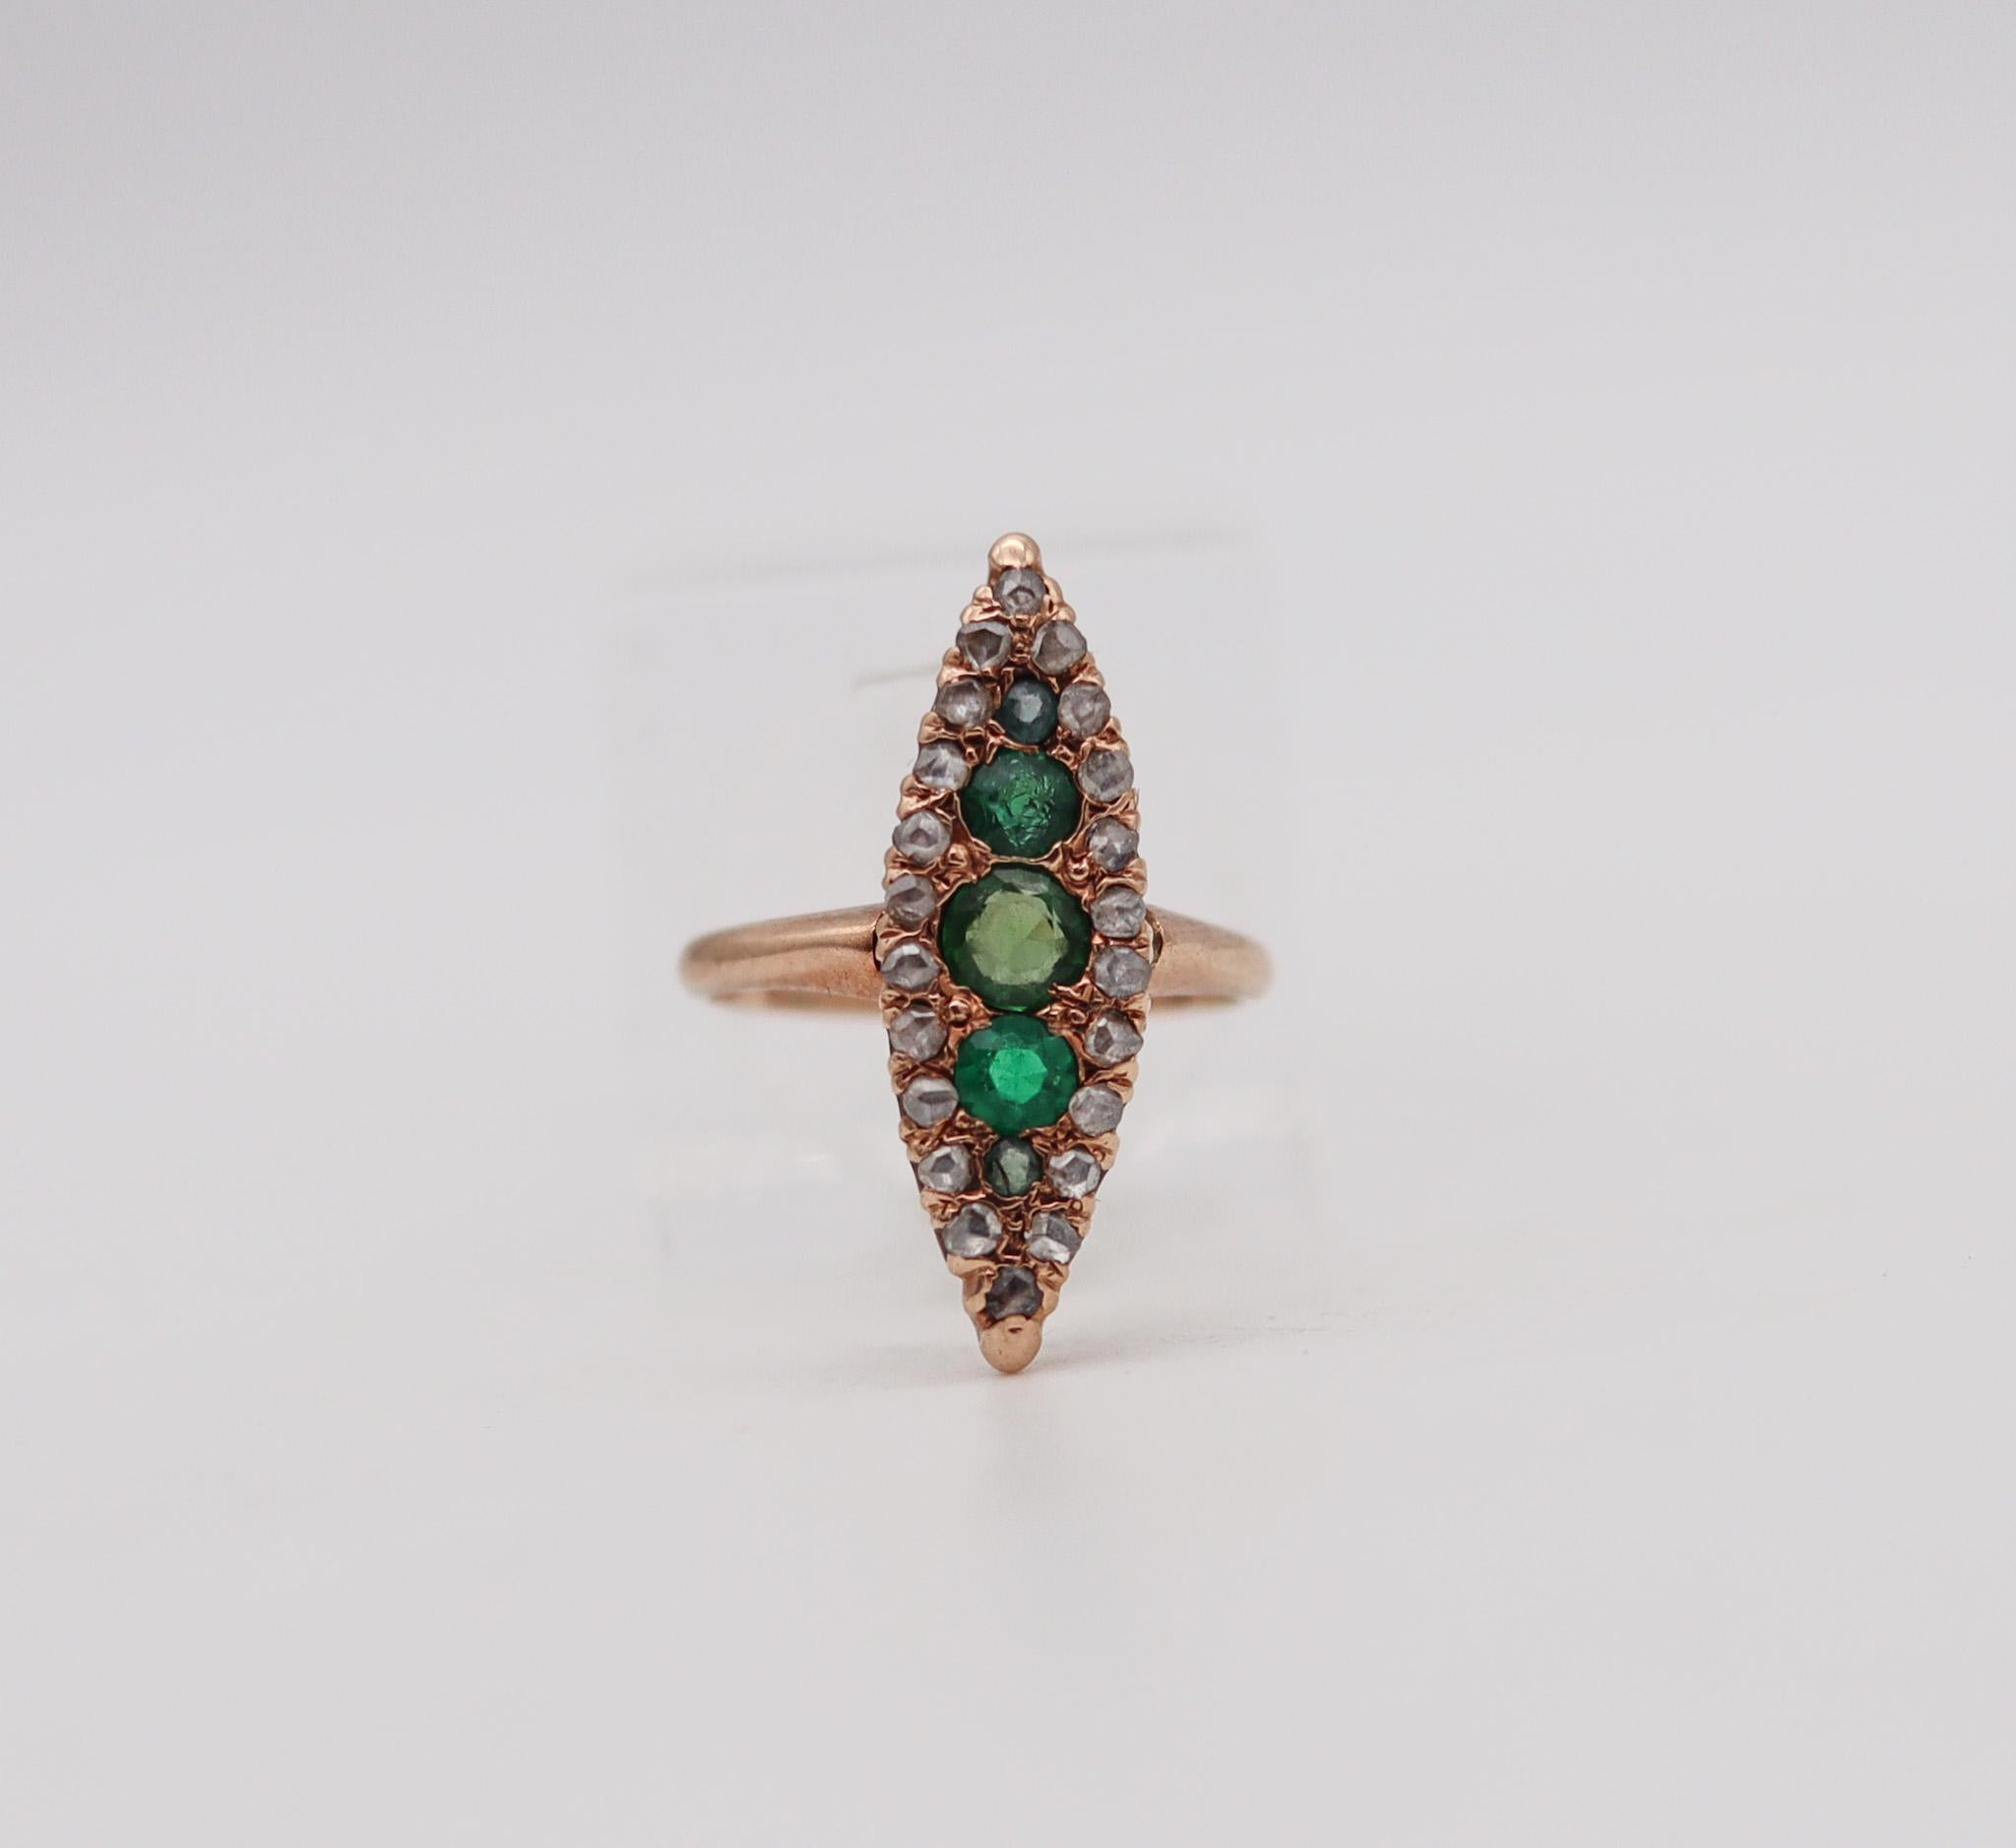 Rose Cut Victorian 1870 Antique Navette Ring In 14Kt Gold With Diamonds And Green Garnets